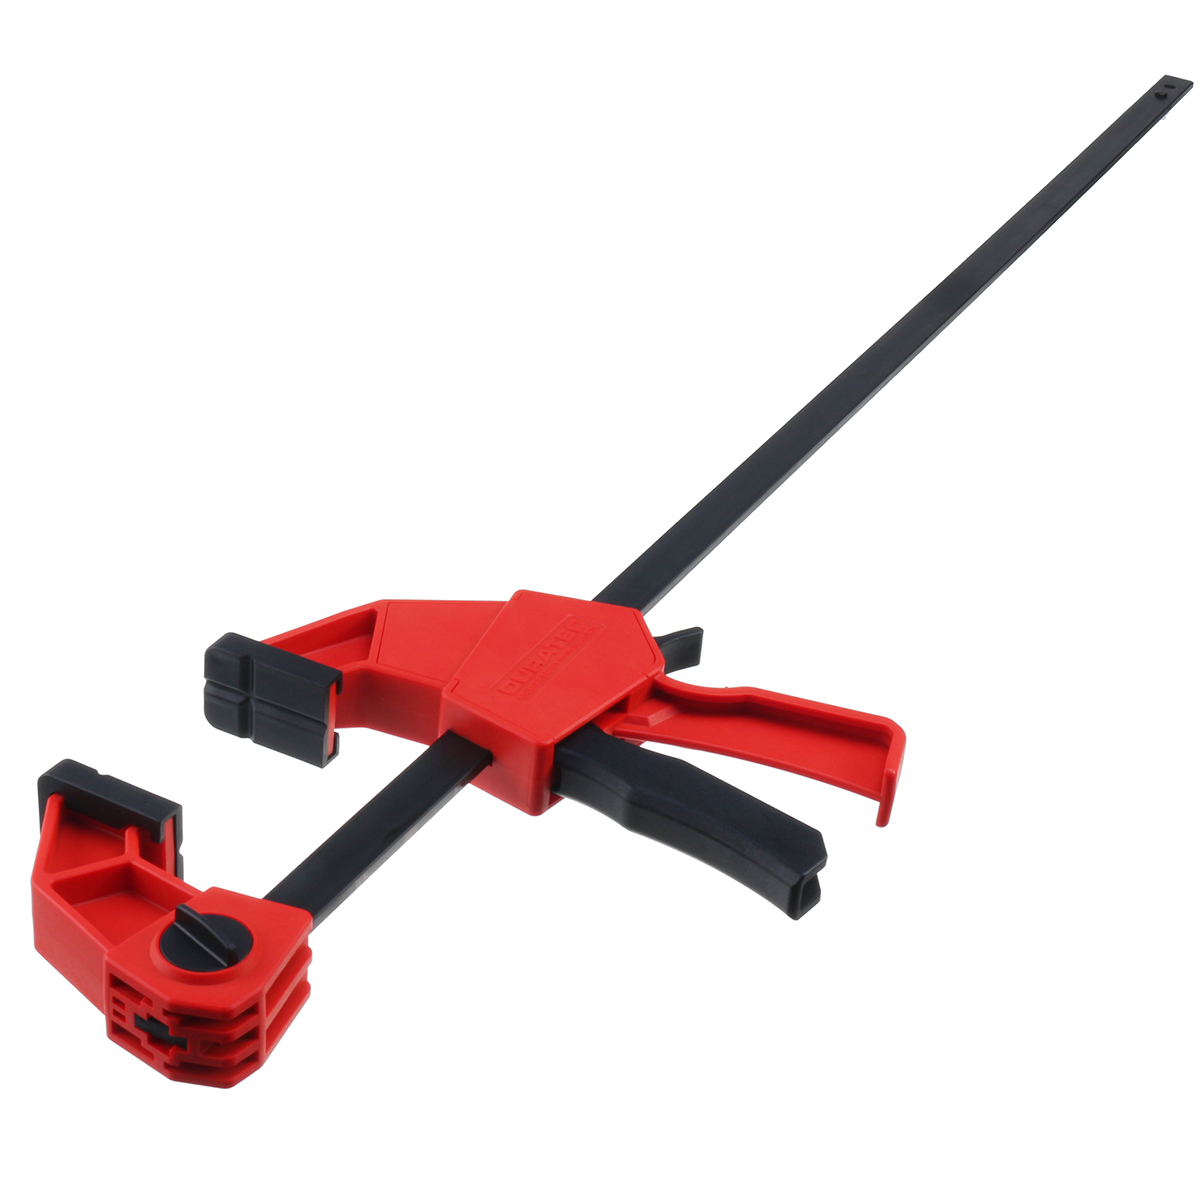 3036Inch-Heavy-Duty-F-Clamp-WoodWorking-Quick-Grip-Bar-Plastic-Grip-Wood-Clamp-1630185-6